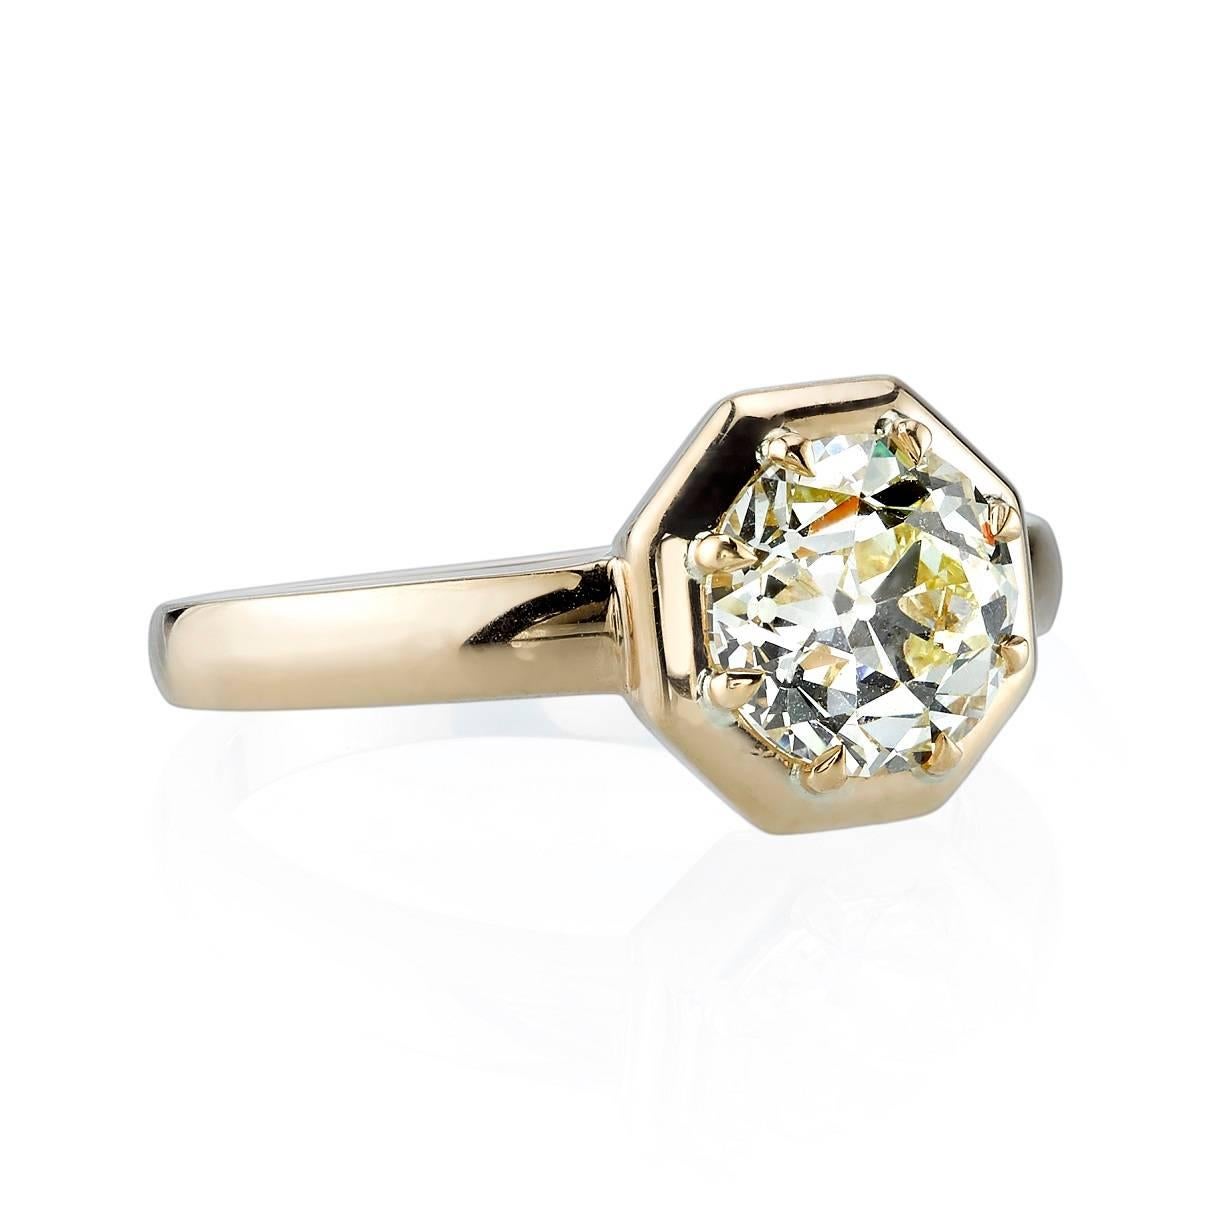 1.73ct OP/VS1 old European cut diamond EGL certified and set in a handcrafted 18k yellow gold mounting.